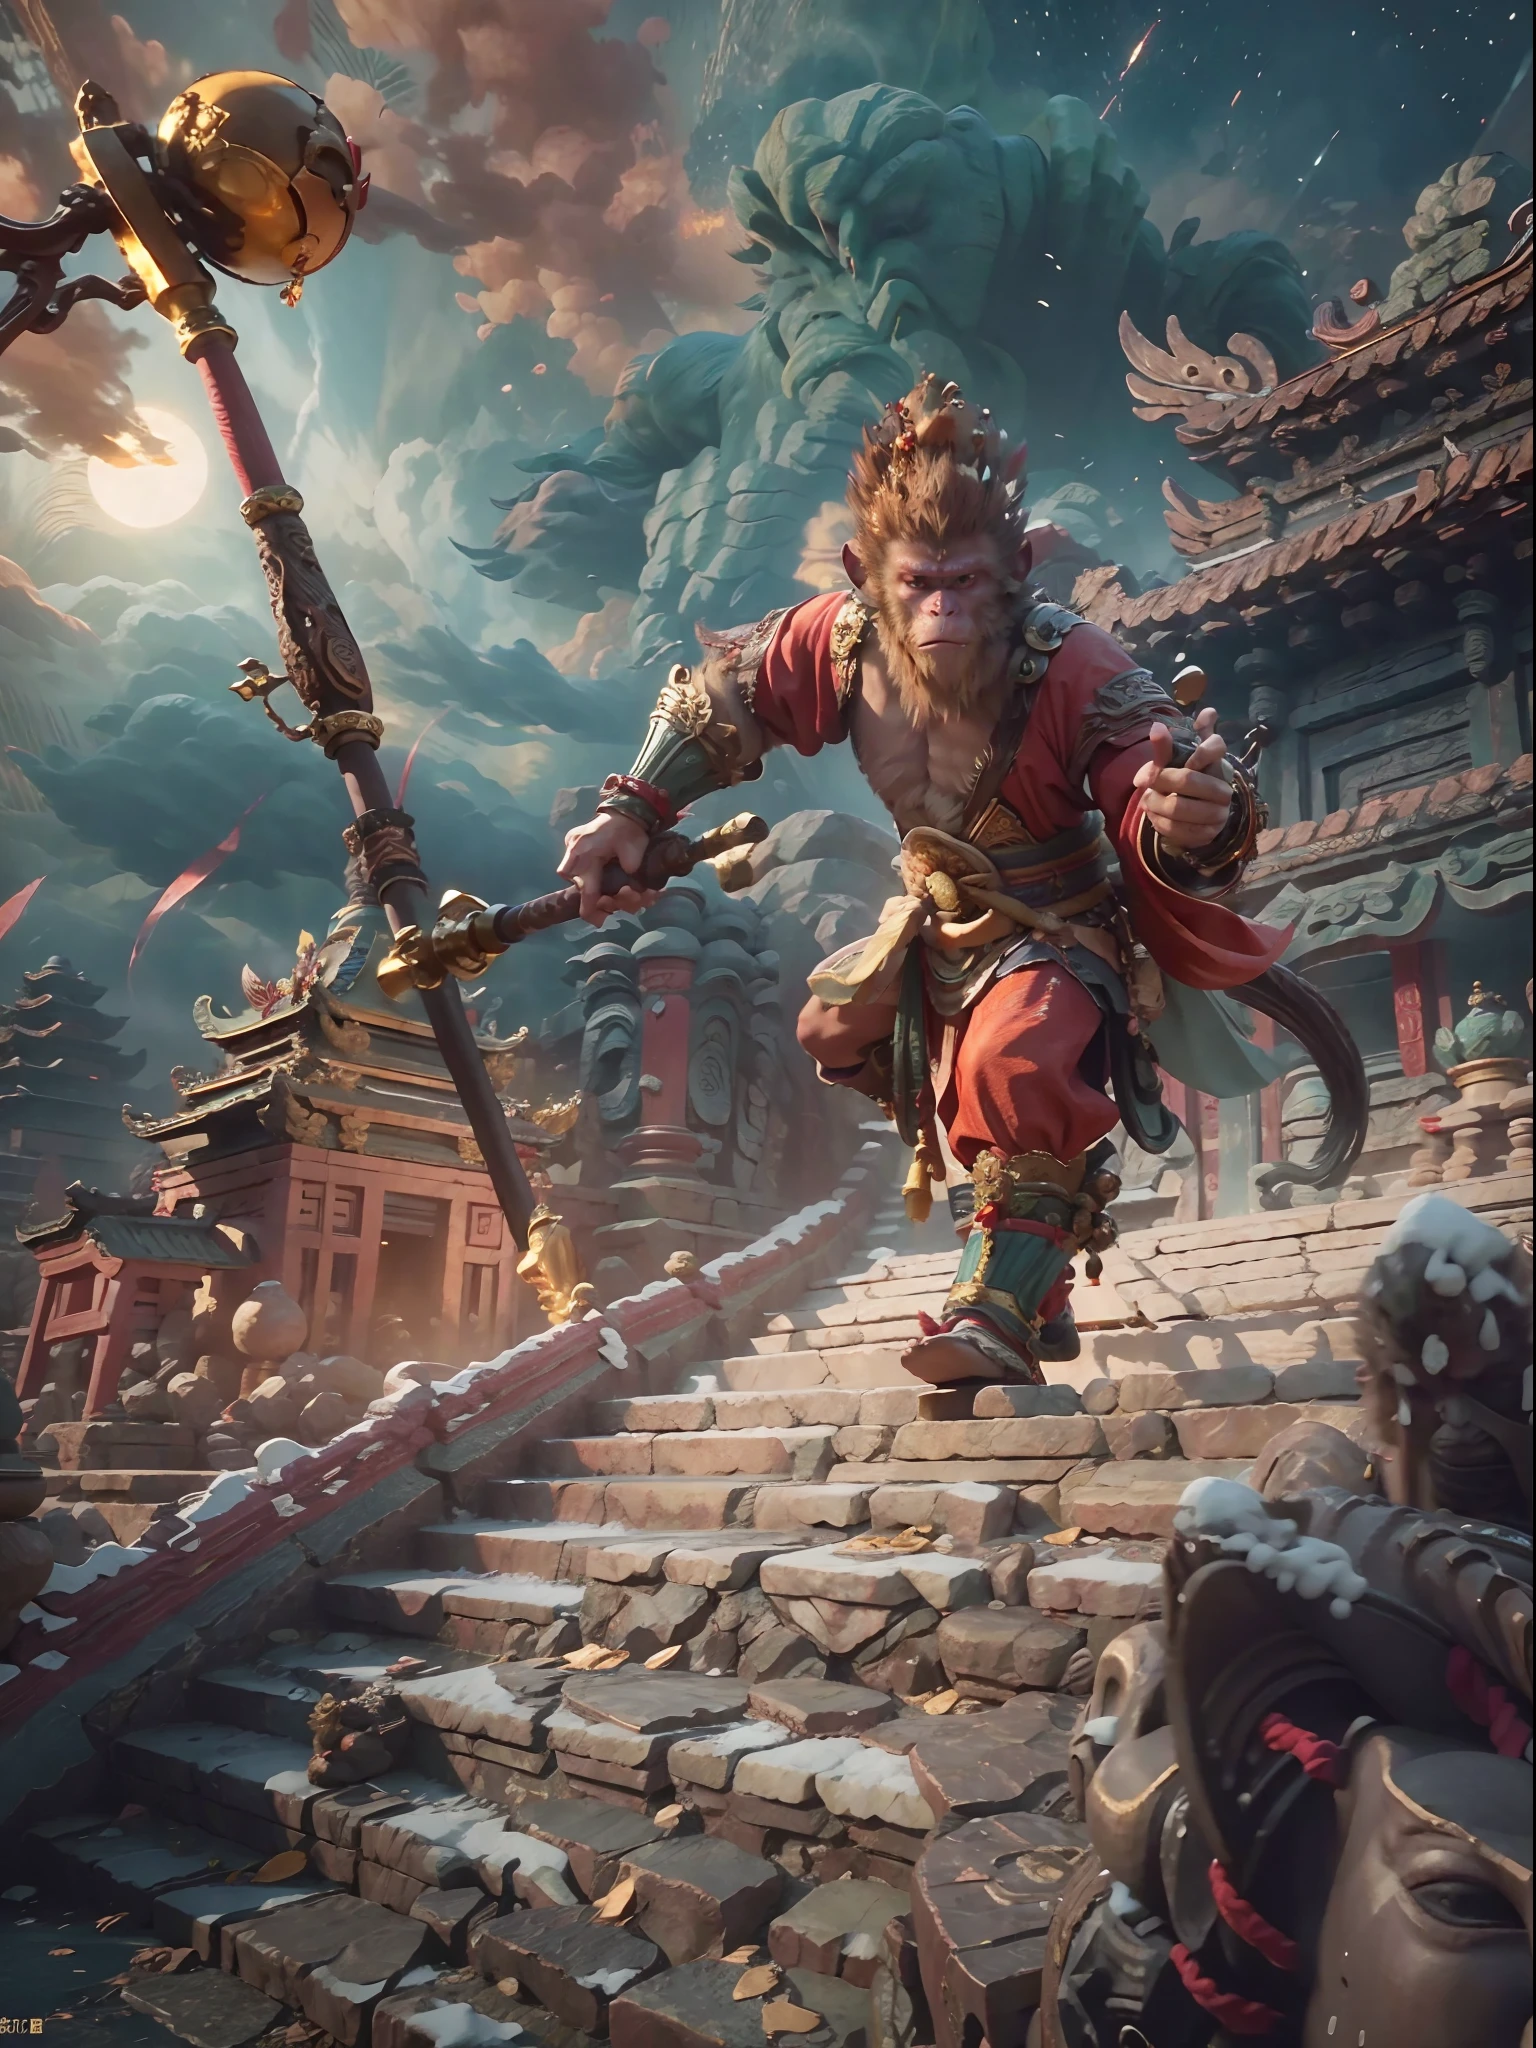 (highres:1.4),official art, unity 8k wallpaper, ultra detailed, beautiful and aesthetic, masterpiece, best quality, realistic, (fractal art), epic scene, highres, (masterpiece), (best quality), pov from above, Sun Wukong, ([golden:red]:0.4) fur, ([heavy Chinese armor:red cape]:0.4), (one hand holding the Golden Cudgel:1.2), ([monkey king|Sun Wukong]) stomp on ground ready to fly to the top of an ancient Chinese temple ready to battle, tall ancient Chinese temple, night, night sky, (cracked ground:1.2), feet on ground, monkey walking on ground, snow and cloud on the horizon, flying,